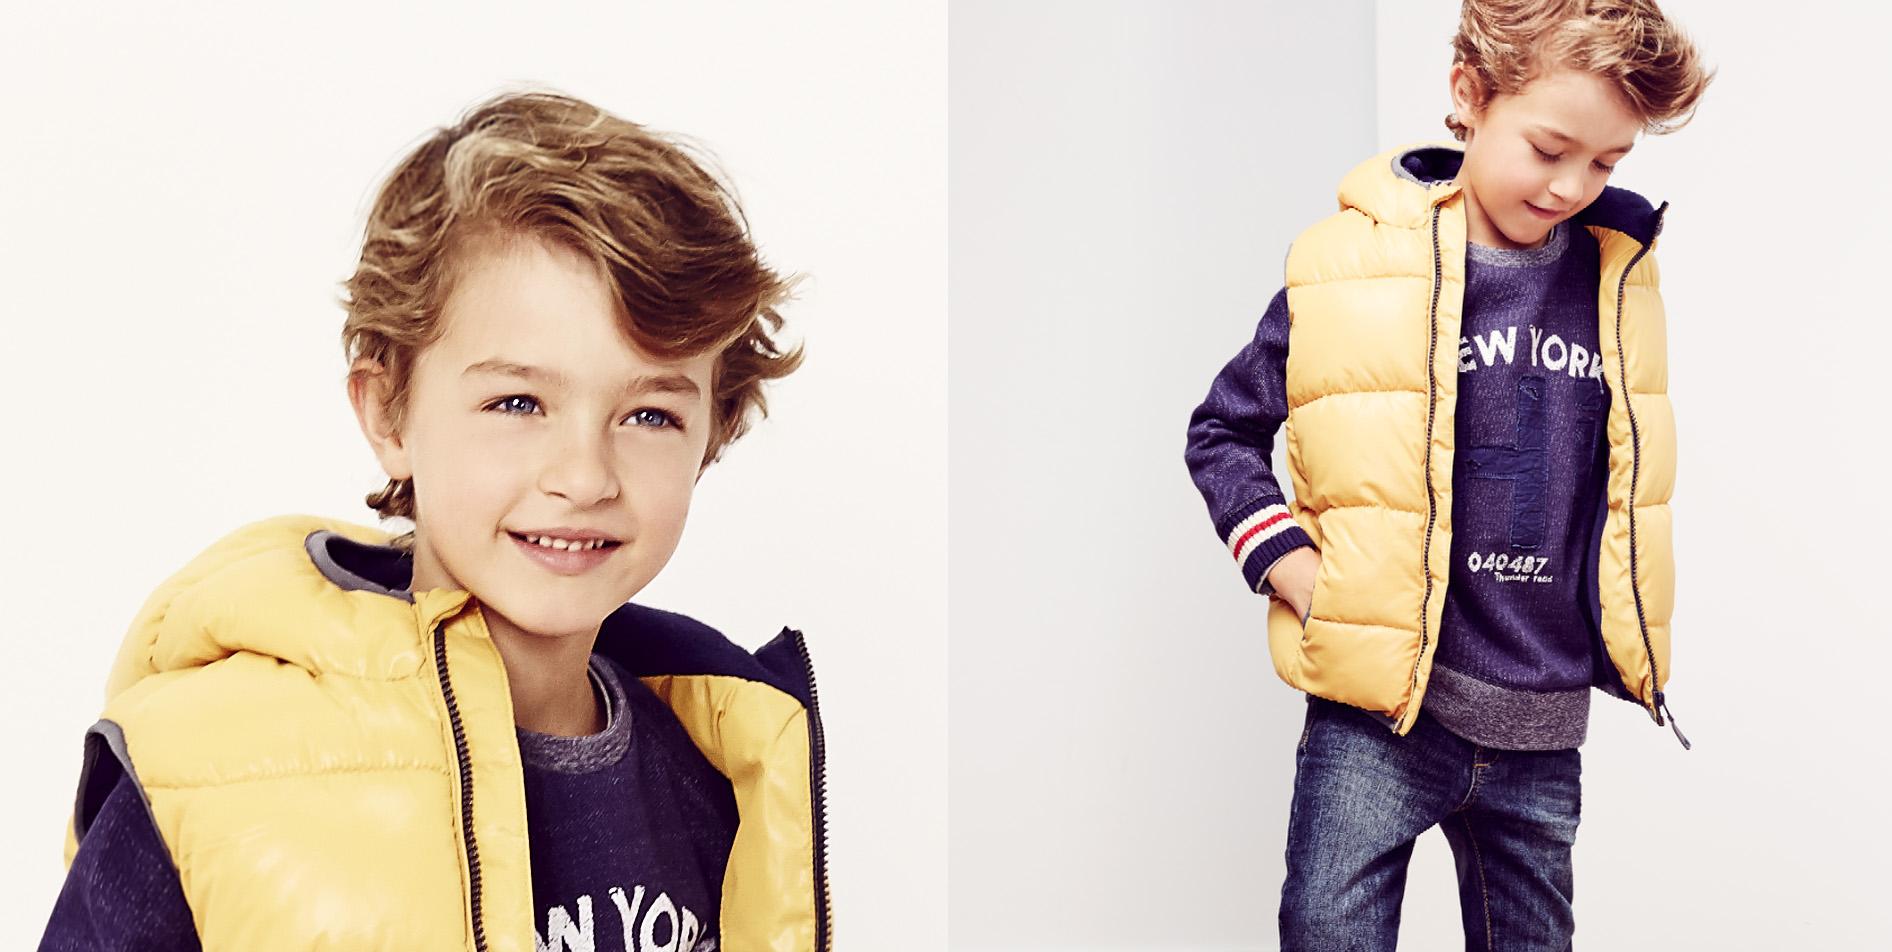 lefties on Twitter: "Boys' #Gilet Collection #FW14 - Chaleco para # niño Collection FW14 #fashion #boysclothing http://t.co/rlsCxBh7Sr" / Twitter